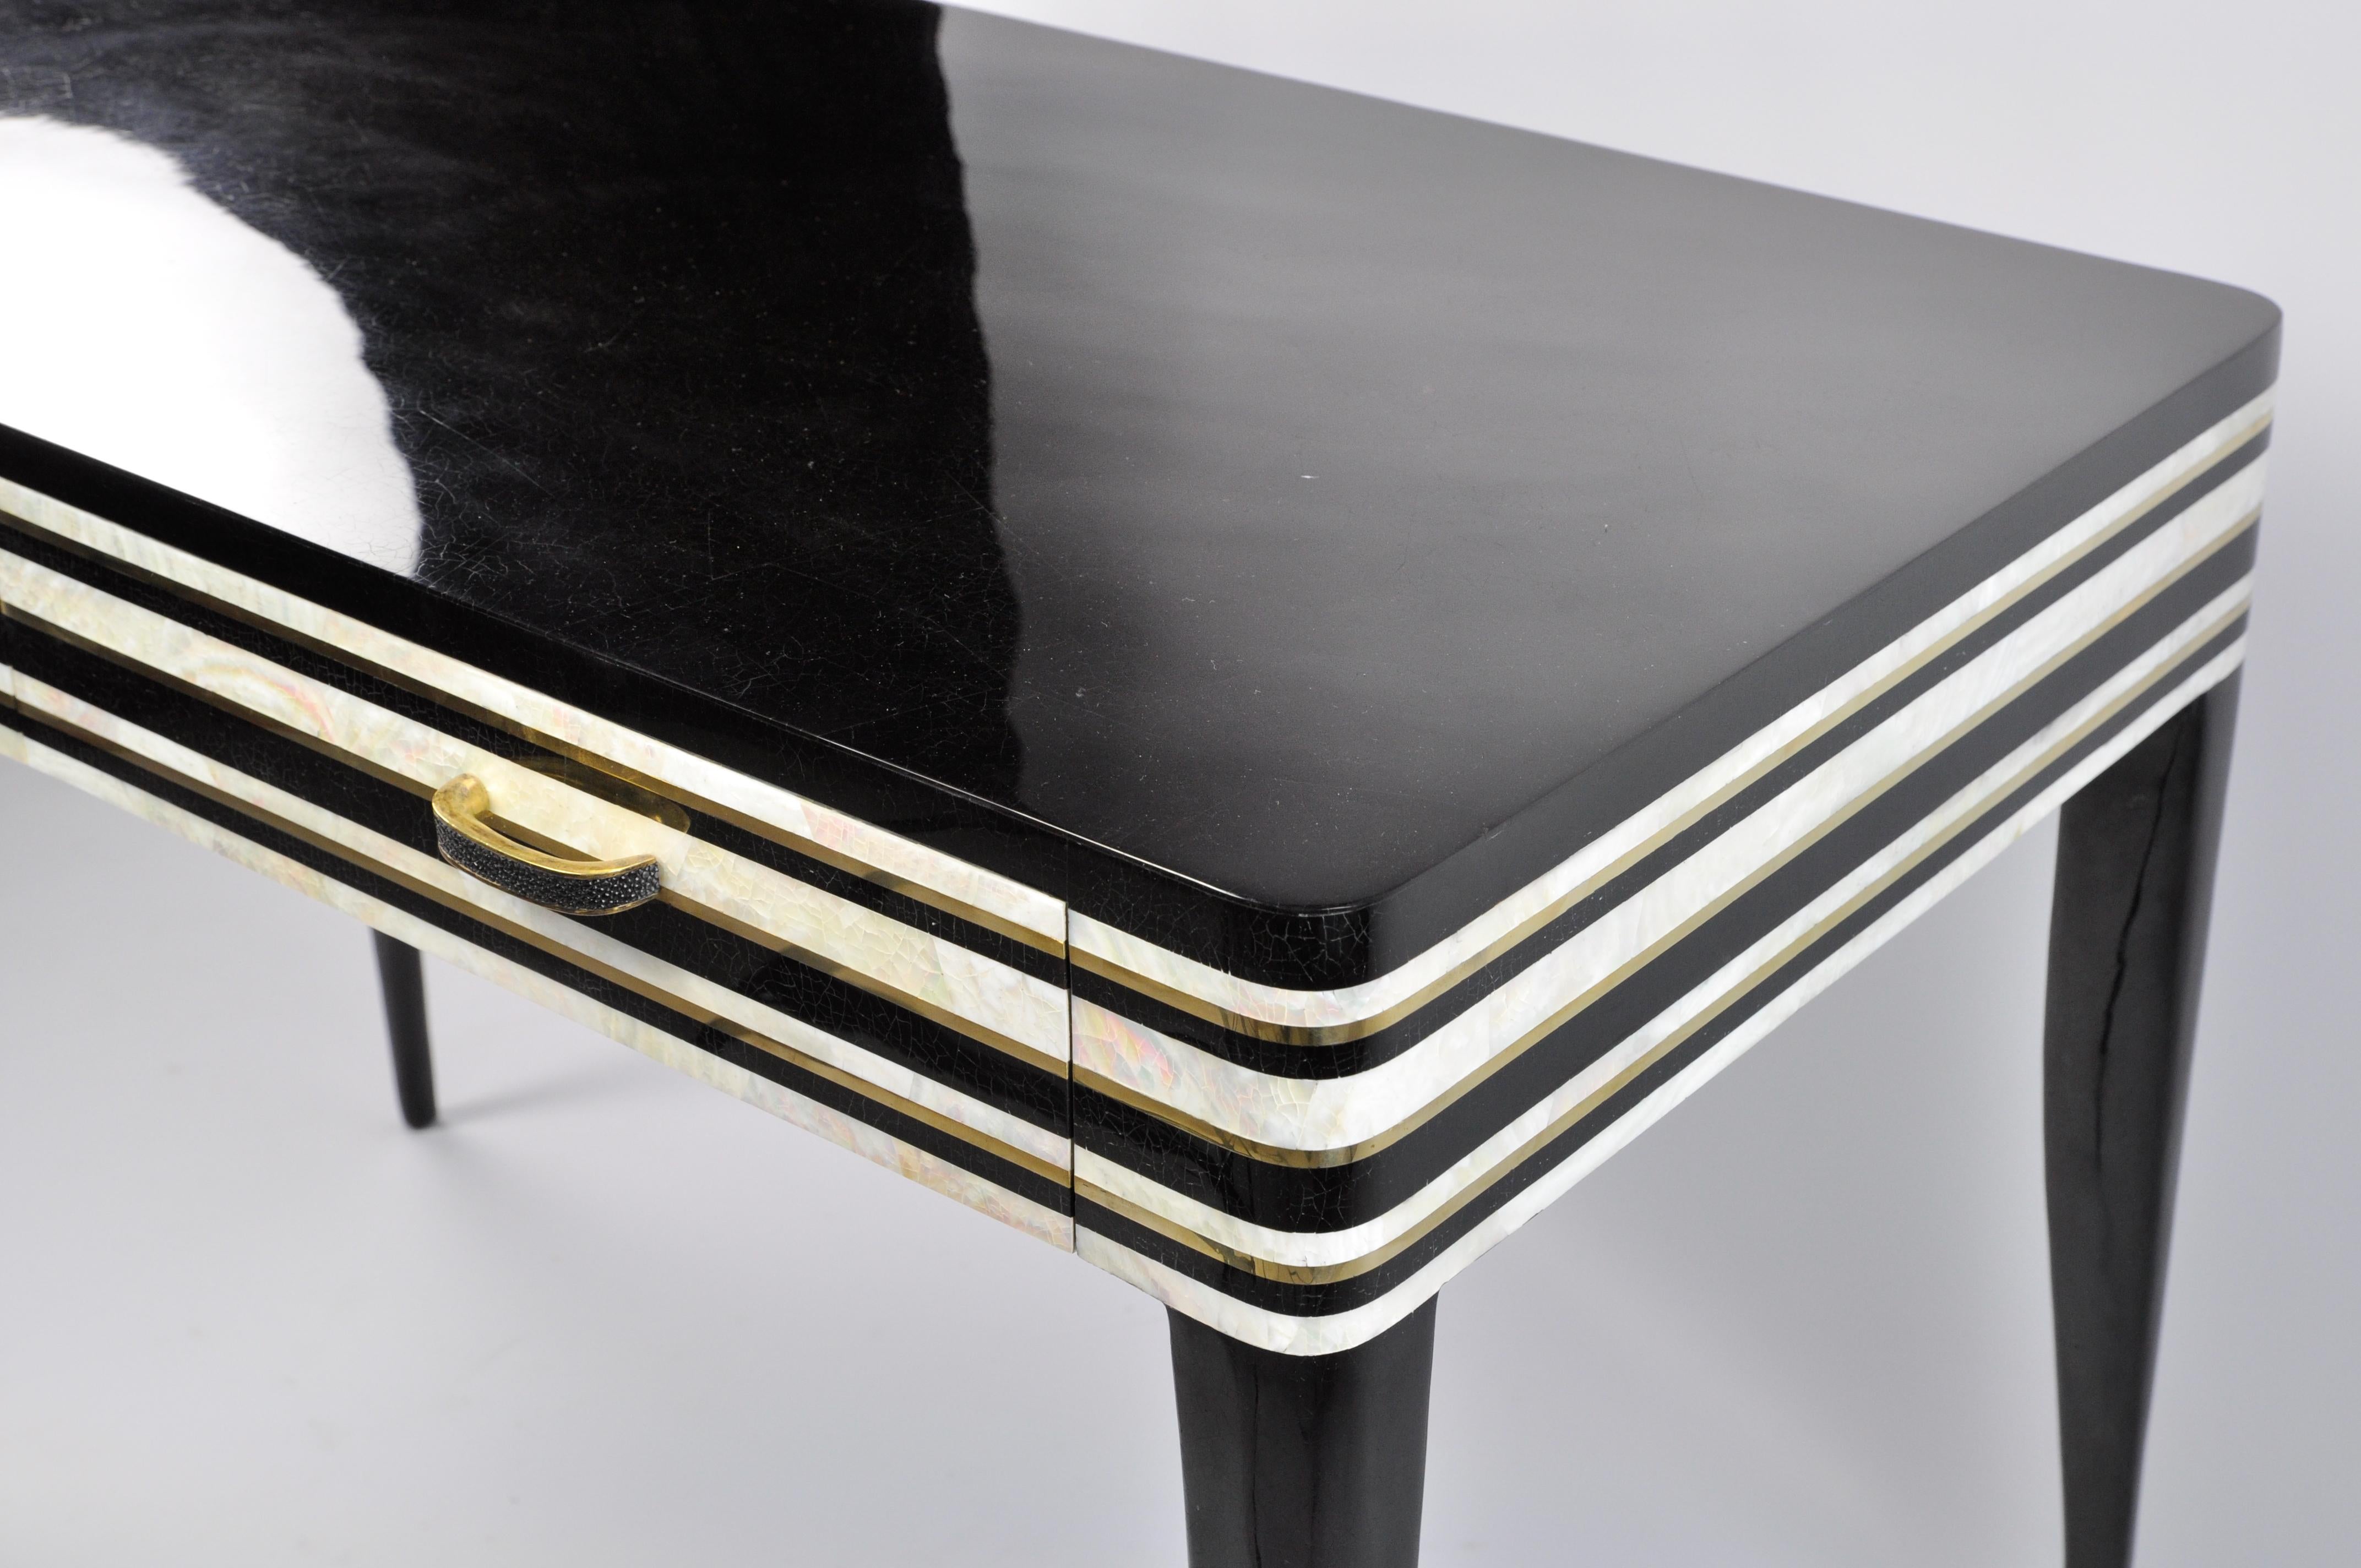 This desk is made of black and white polished shell marquetry with brass trims.
It has 2 drawers with brass and shagreen handles.
The legs are in black polished shell marquetry.
It can be used as a writing desk or as a vanity table in a